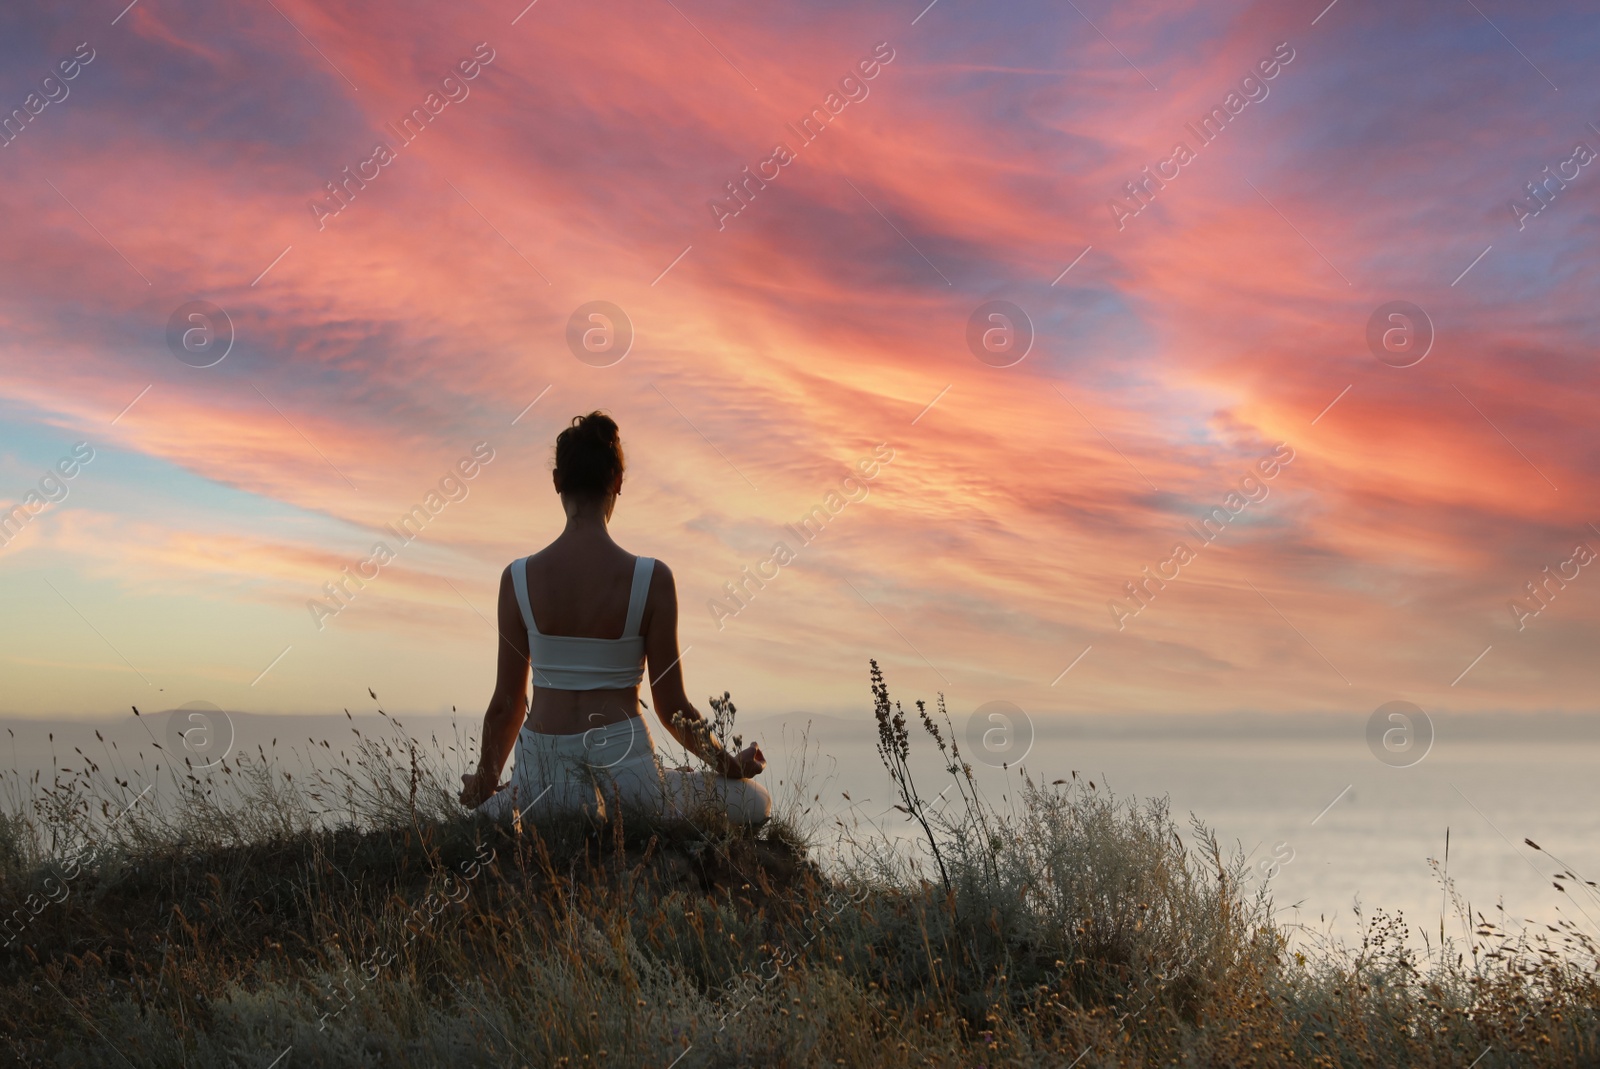 Photo of Woman meditating on hill near sea, back view. Space for text